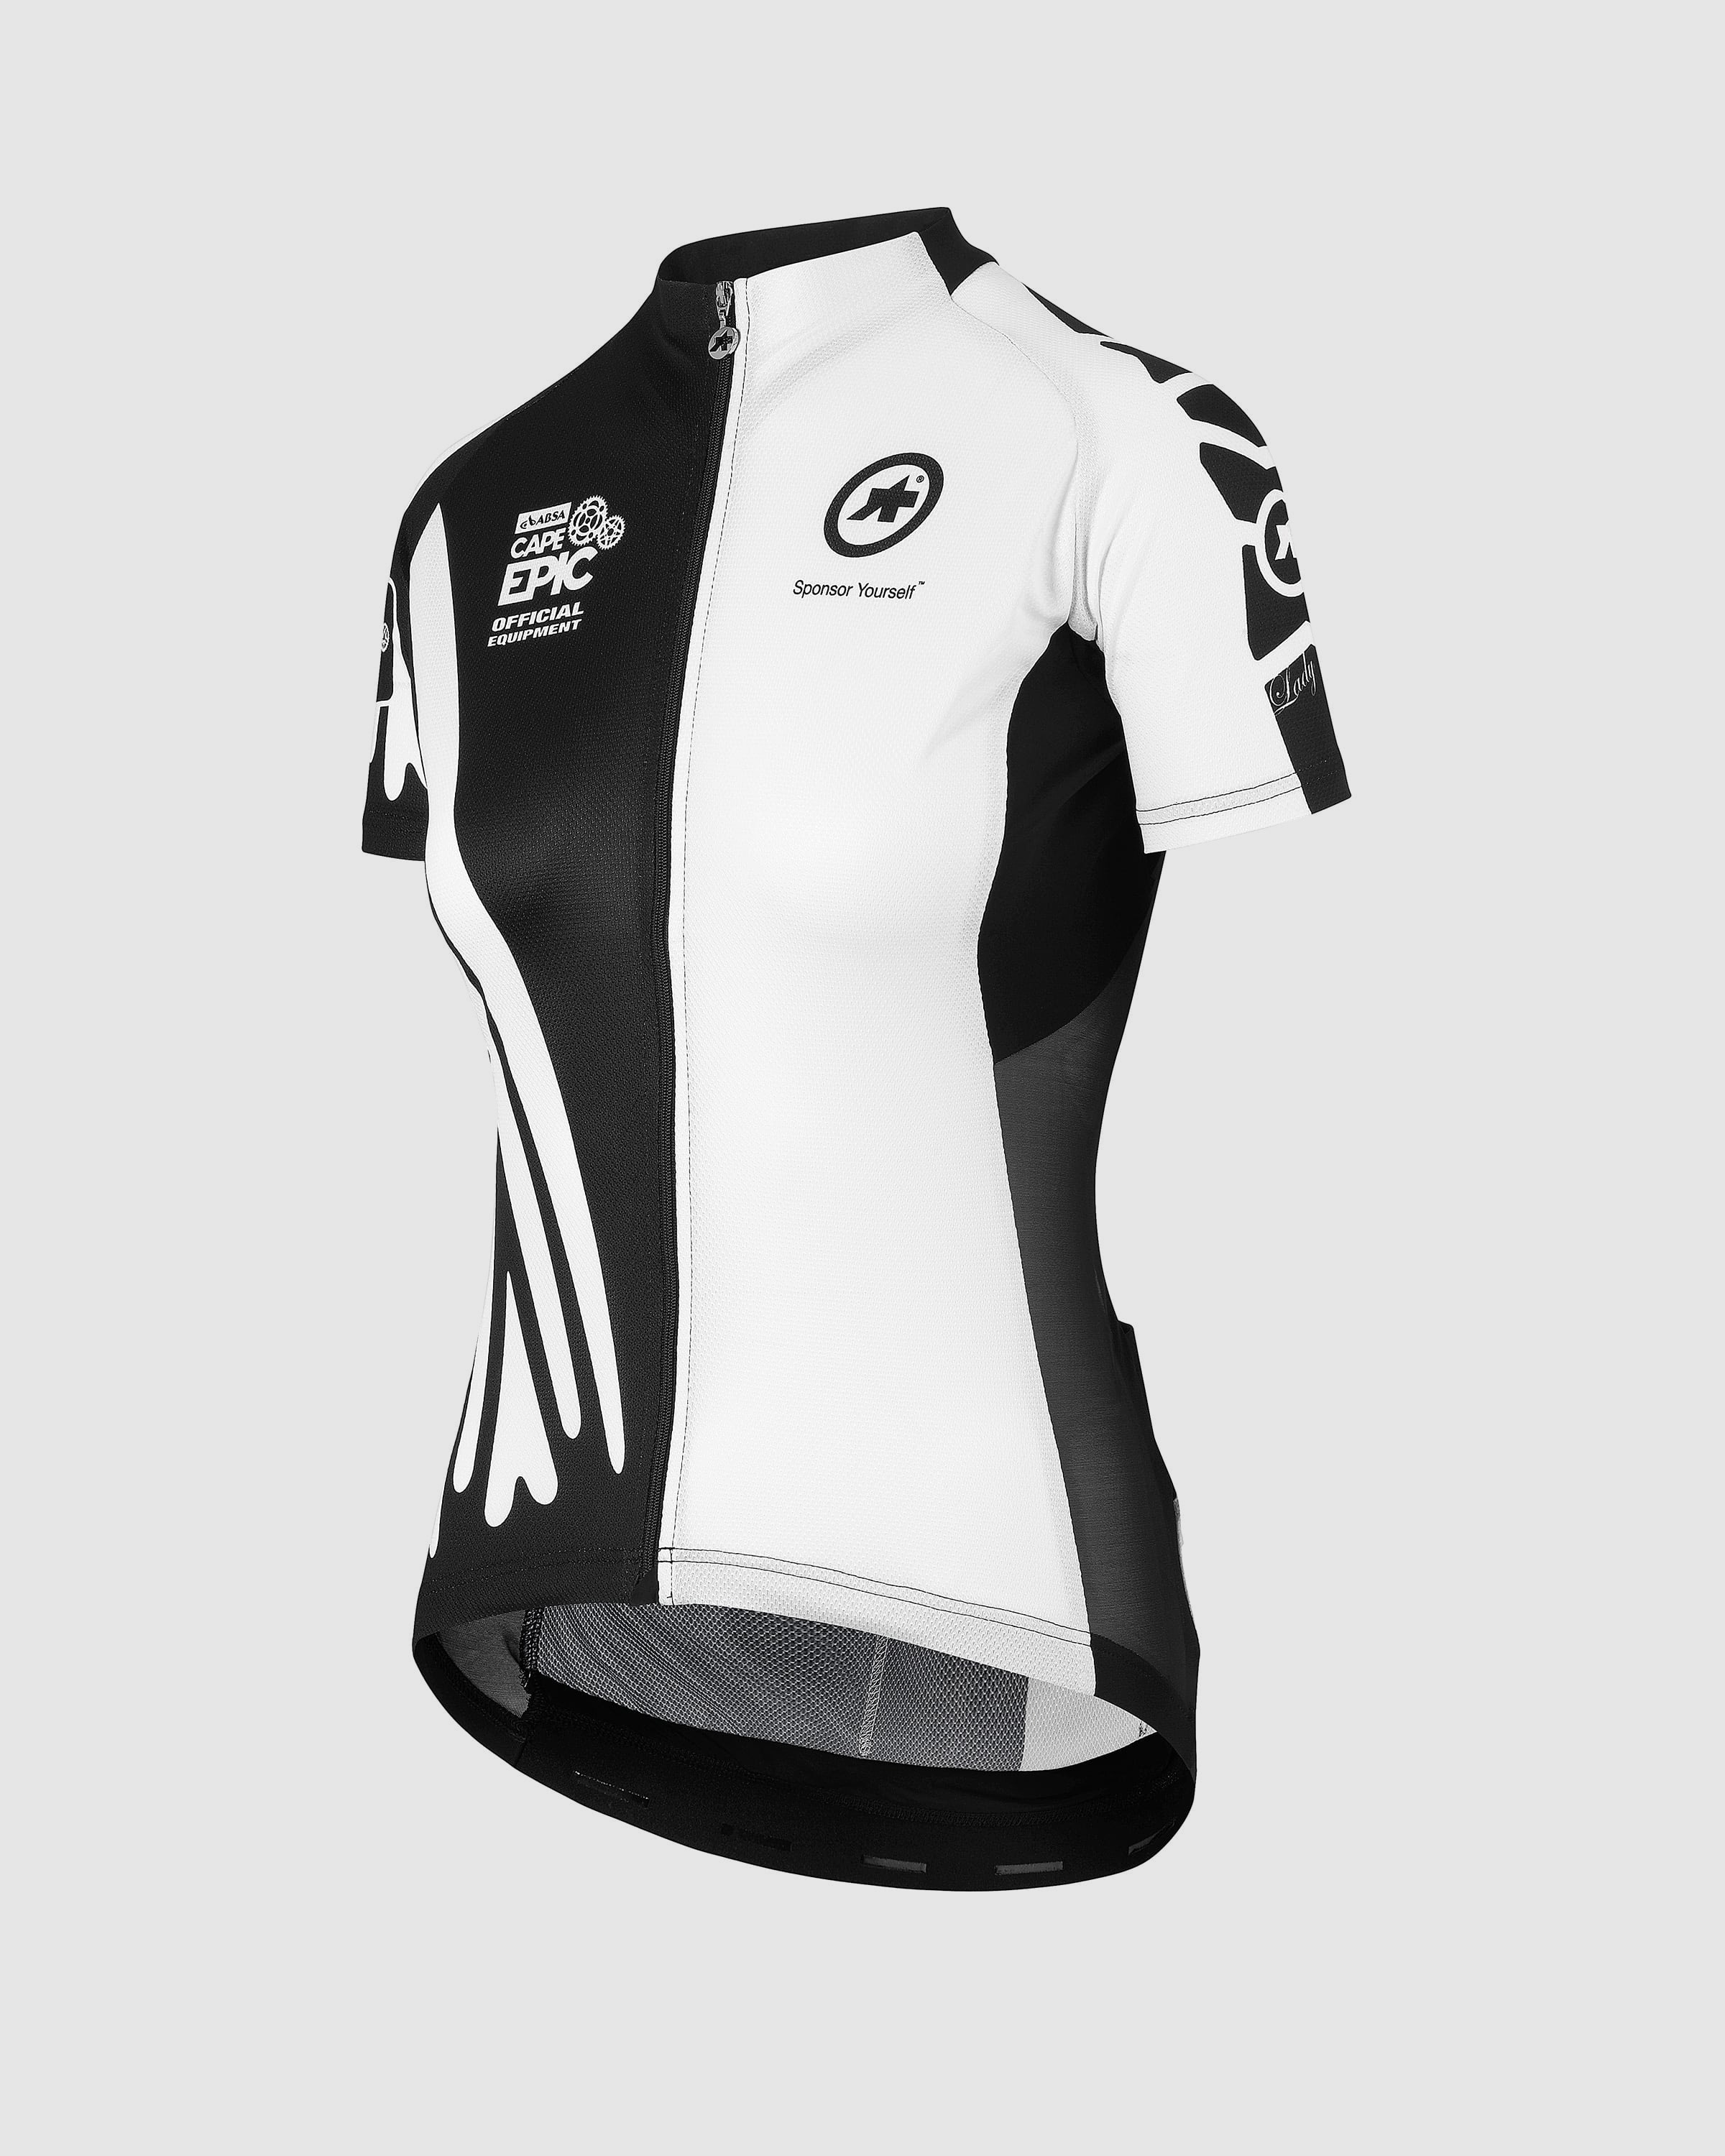 SS.capeepicXCJersey_evo7 Lady - ASSOS Of Switzerland - Official Outlet